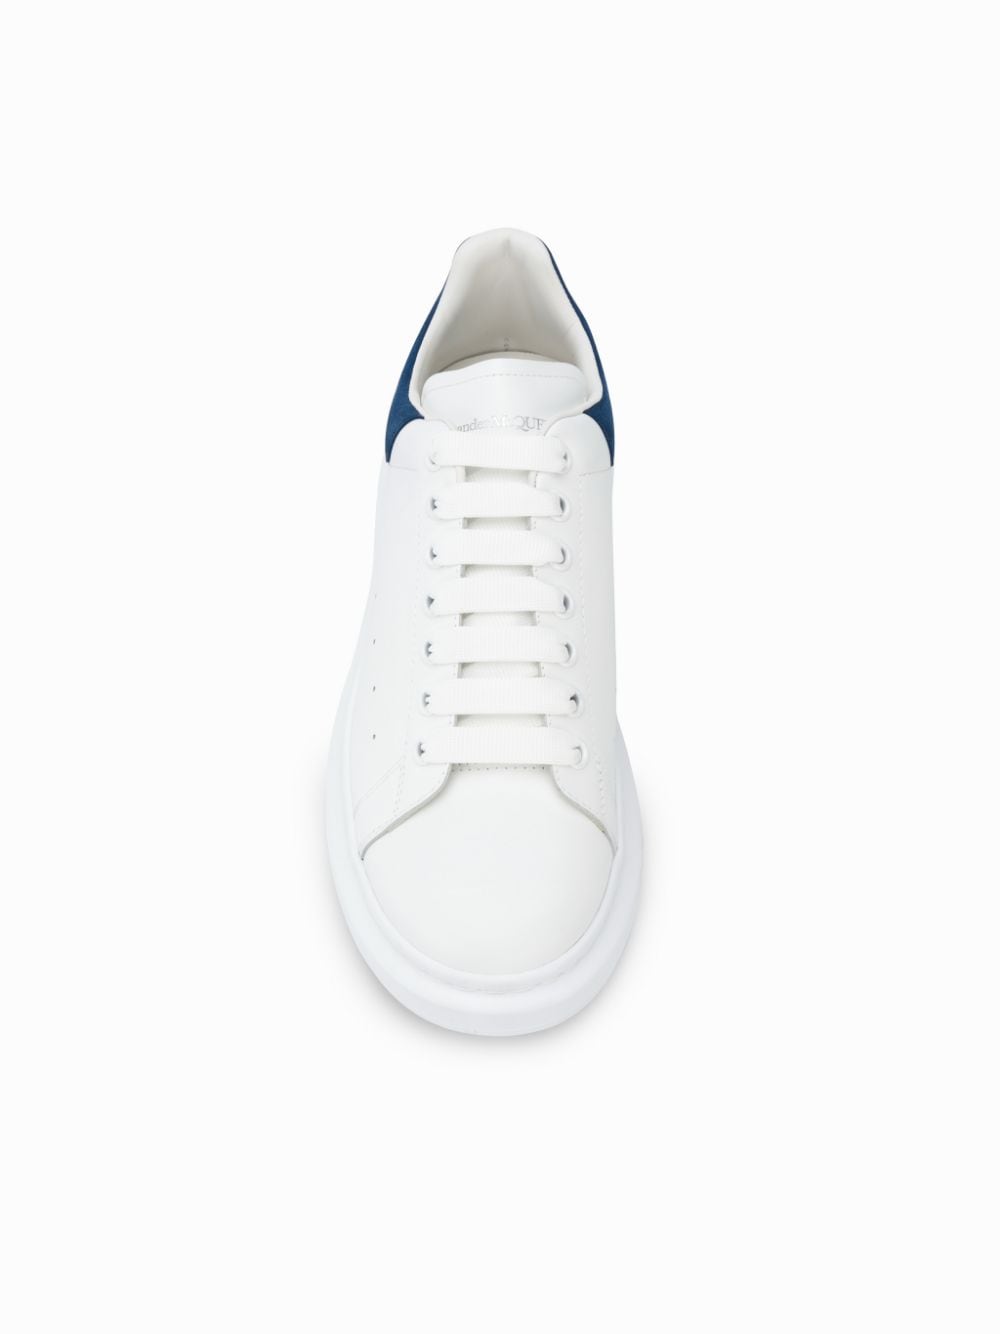 White/blue leather/suede oversized low-top sneakers